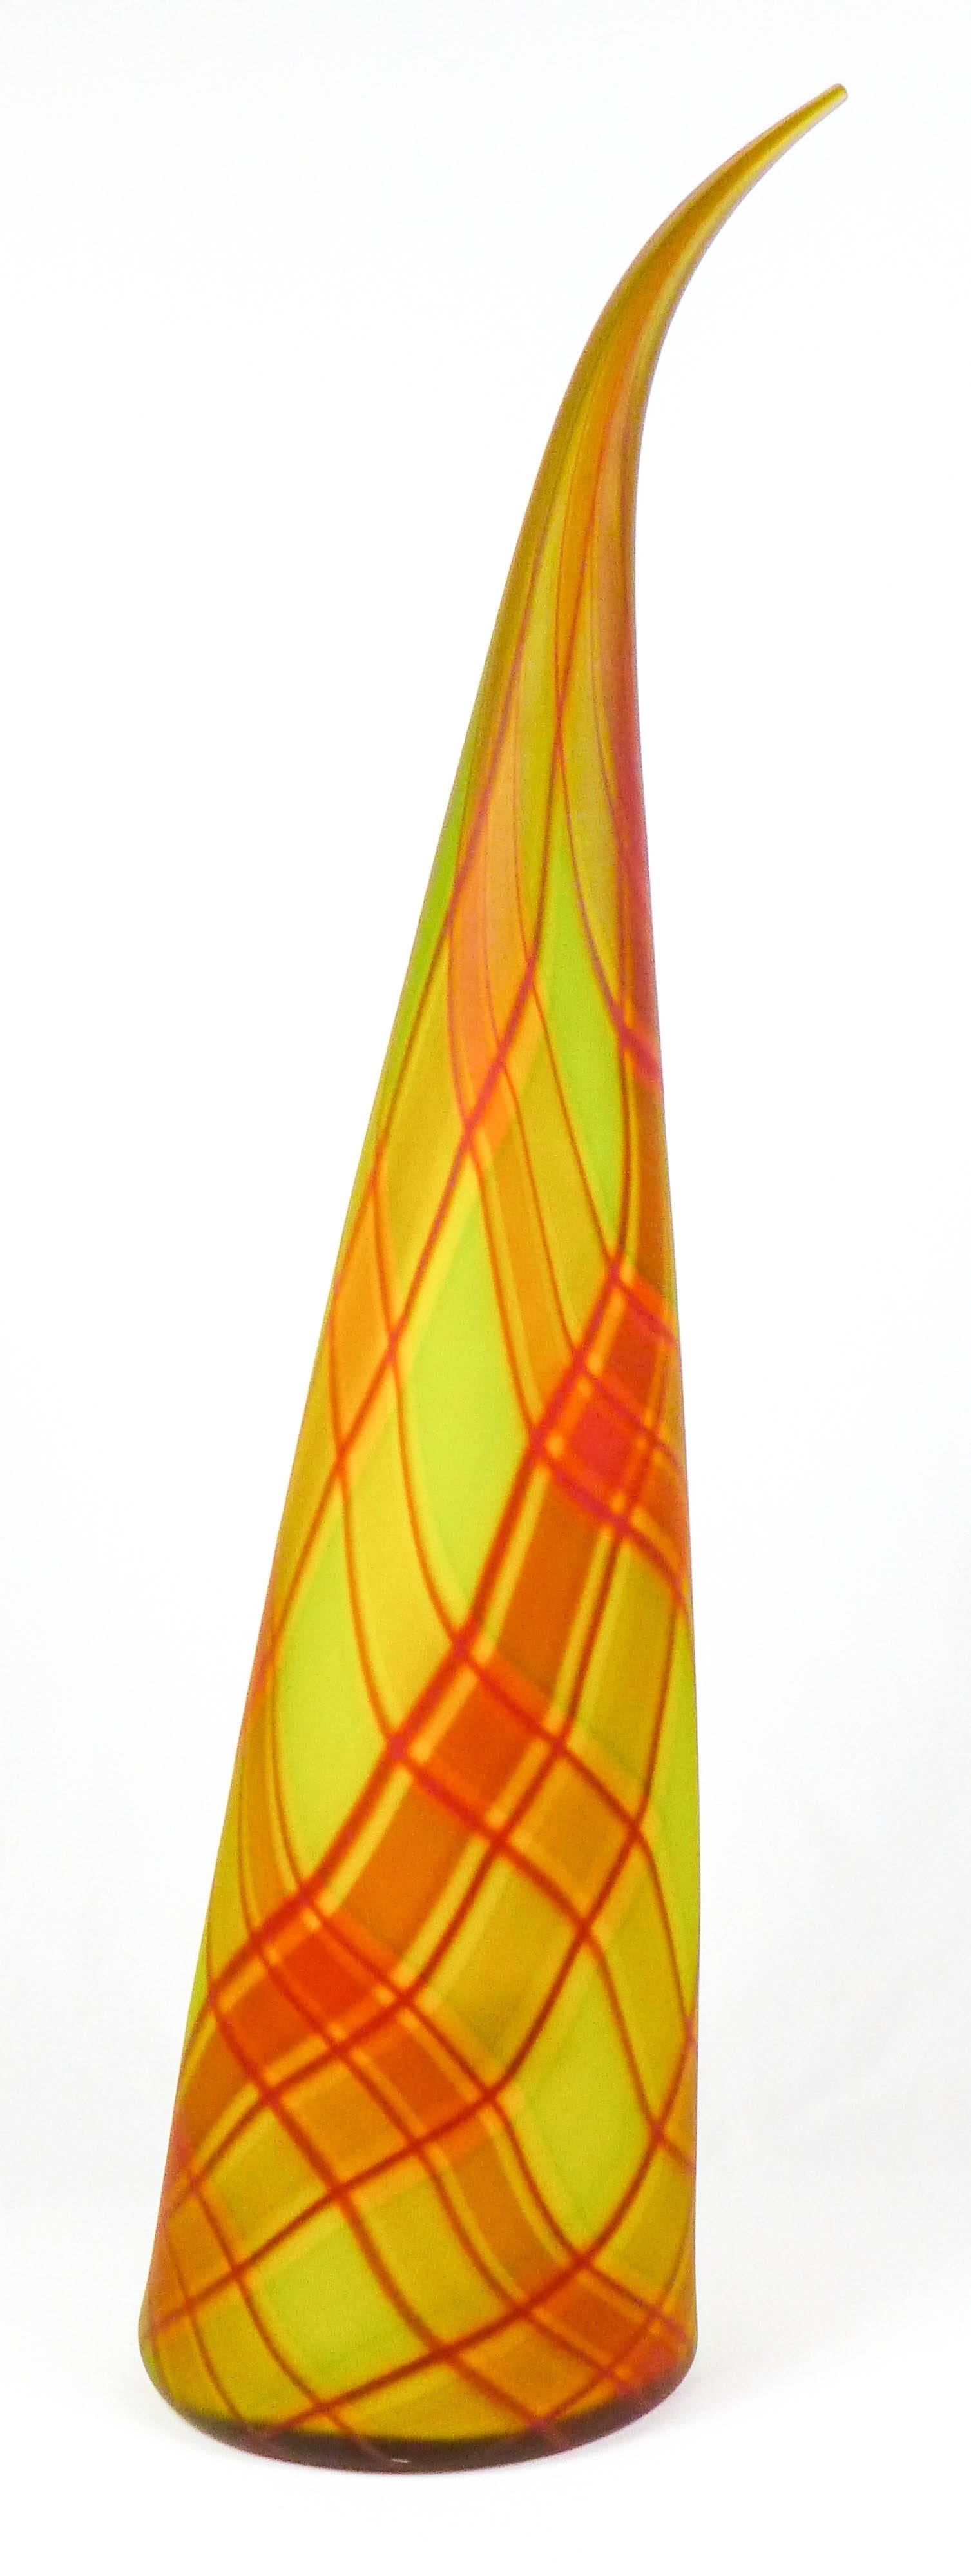 Nancy Callan Abstract Sculpture - Lime Rickey Winkle